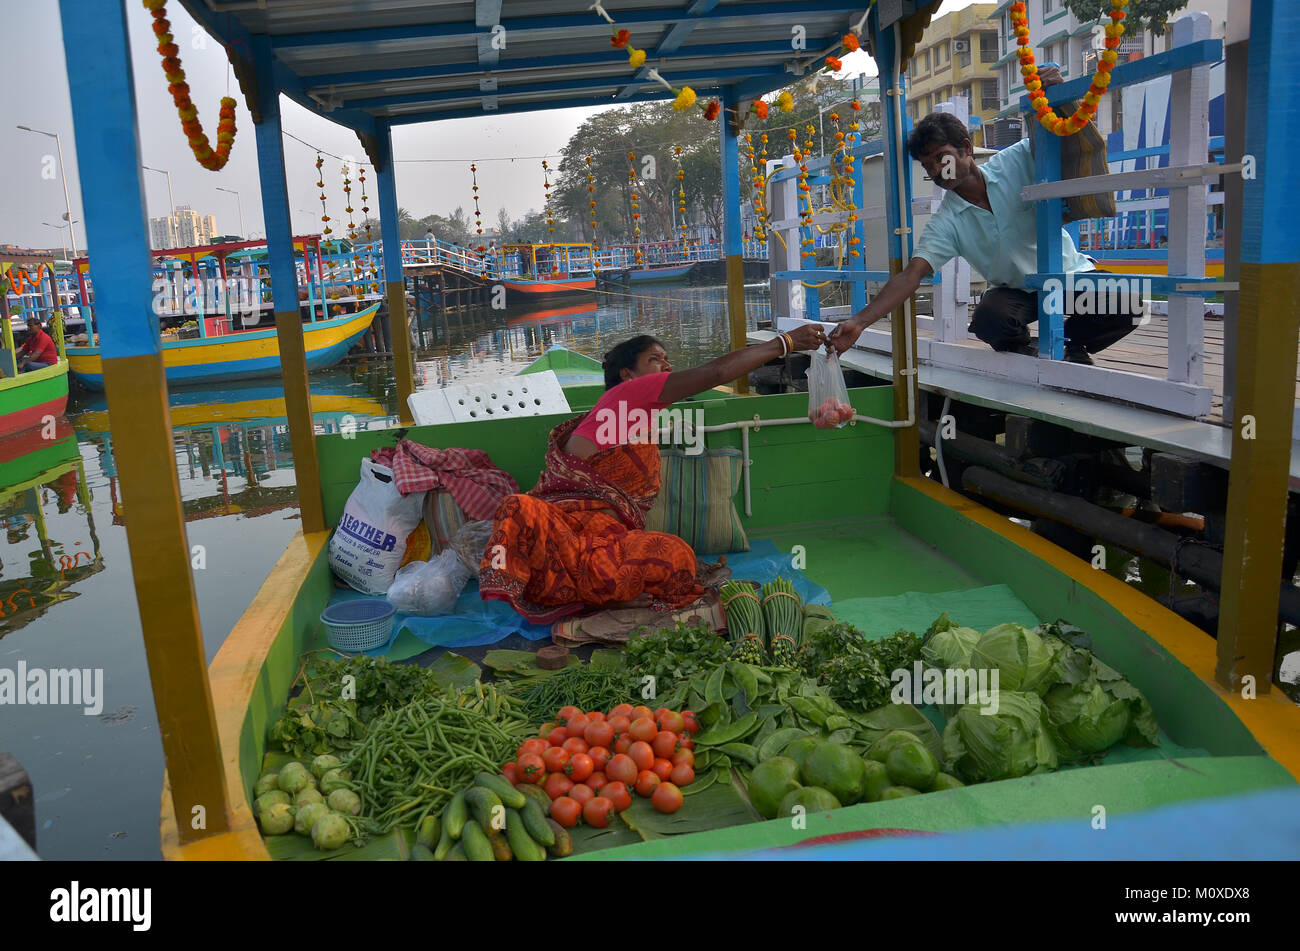 Kolkata, India. 24th Jan, 2018. The floating market opened today in Kolkata's Patuli with 280 shops on boats.The floating market was inaugurated by Chief Minister Mamata Banerjee from Netaji Indoor Stadium in city of Kolkata, India on Thursday. Credit: Sanjay Purkait/Pacific Press/Alamy Live News Stock Photo